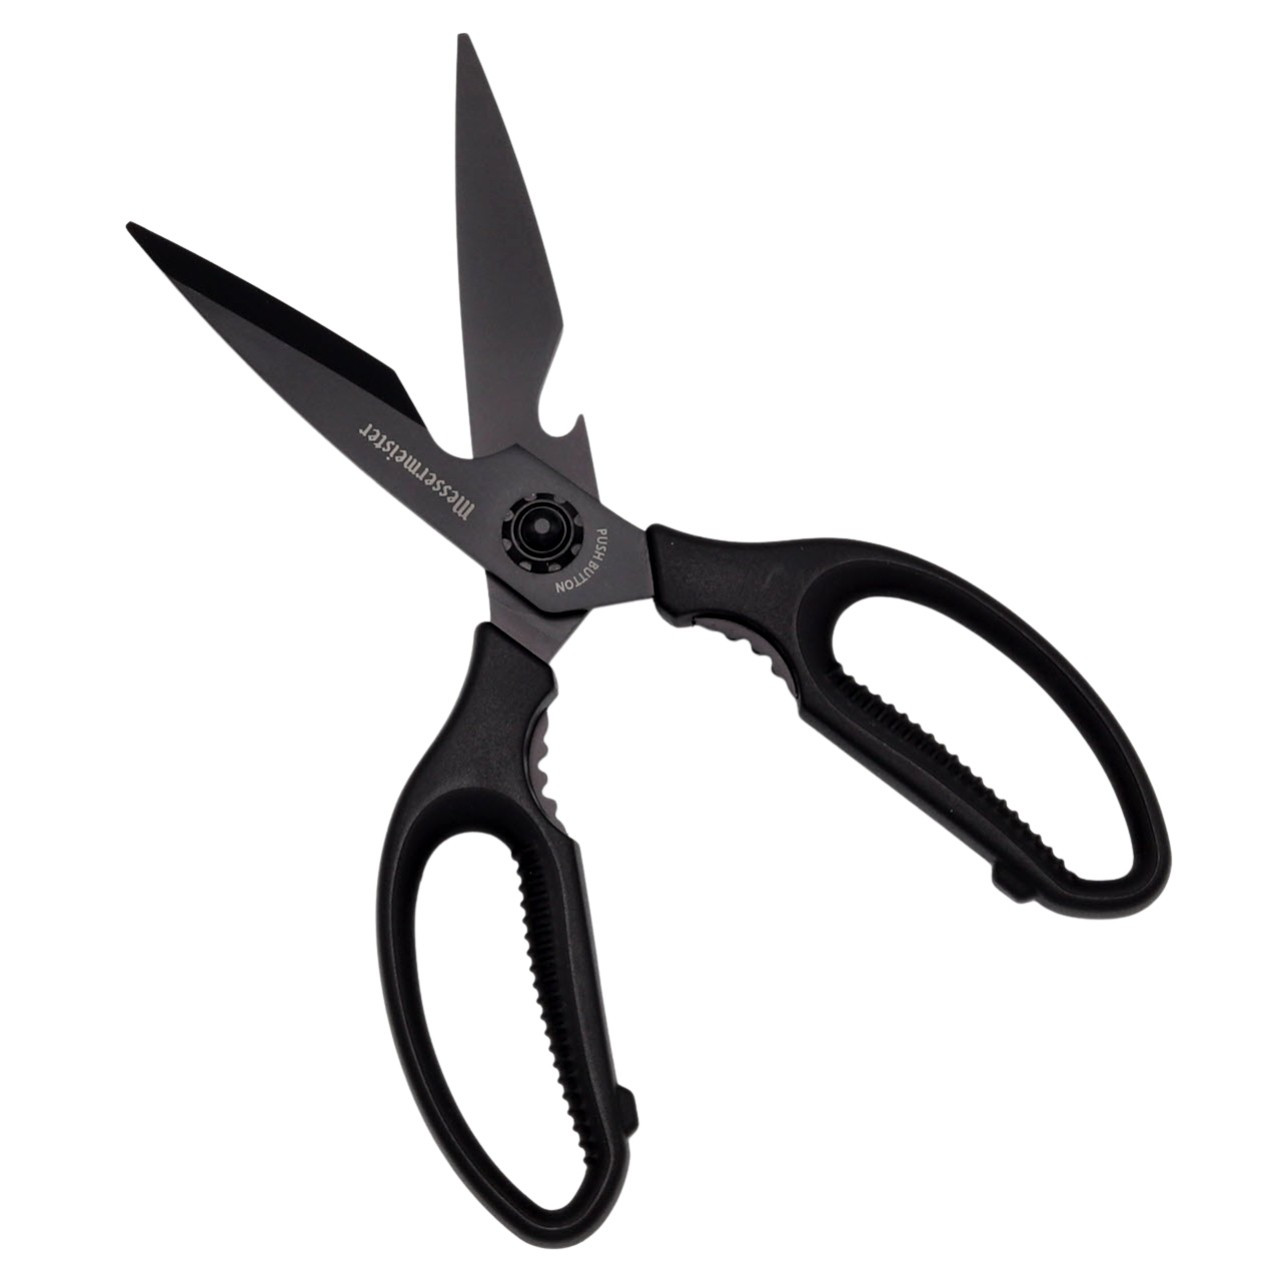 Kitchen Scissors: Patented Take-Apart Stainless Steel Utility